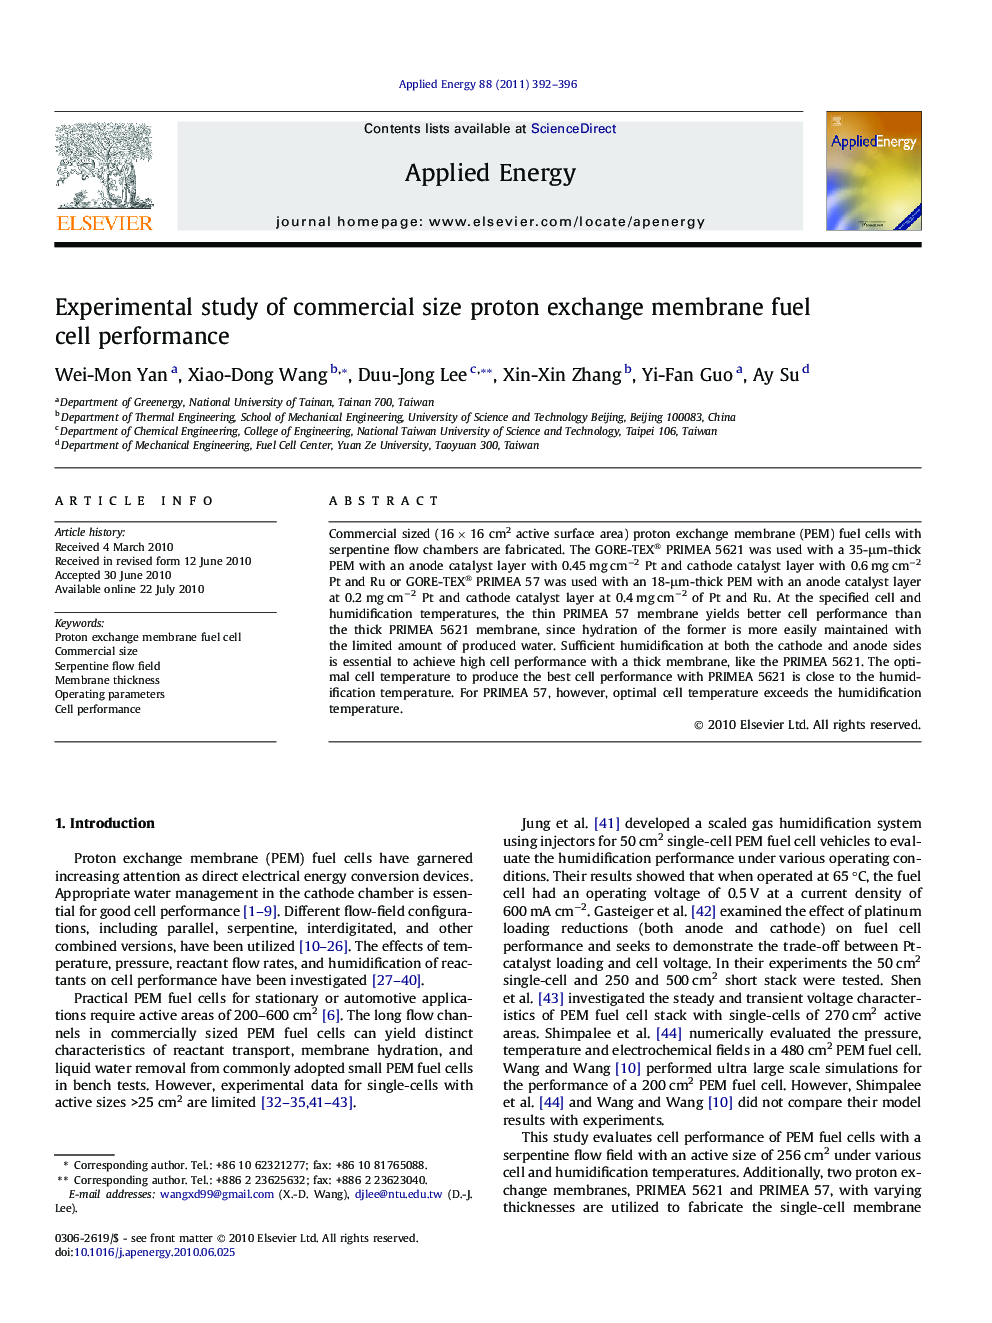 Experimental study of commercial size proton exchange membrane fuel cell performance